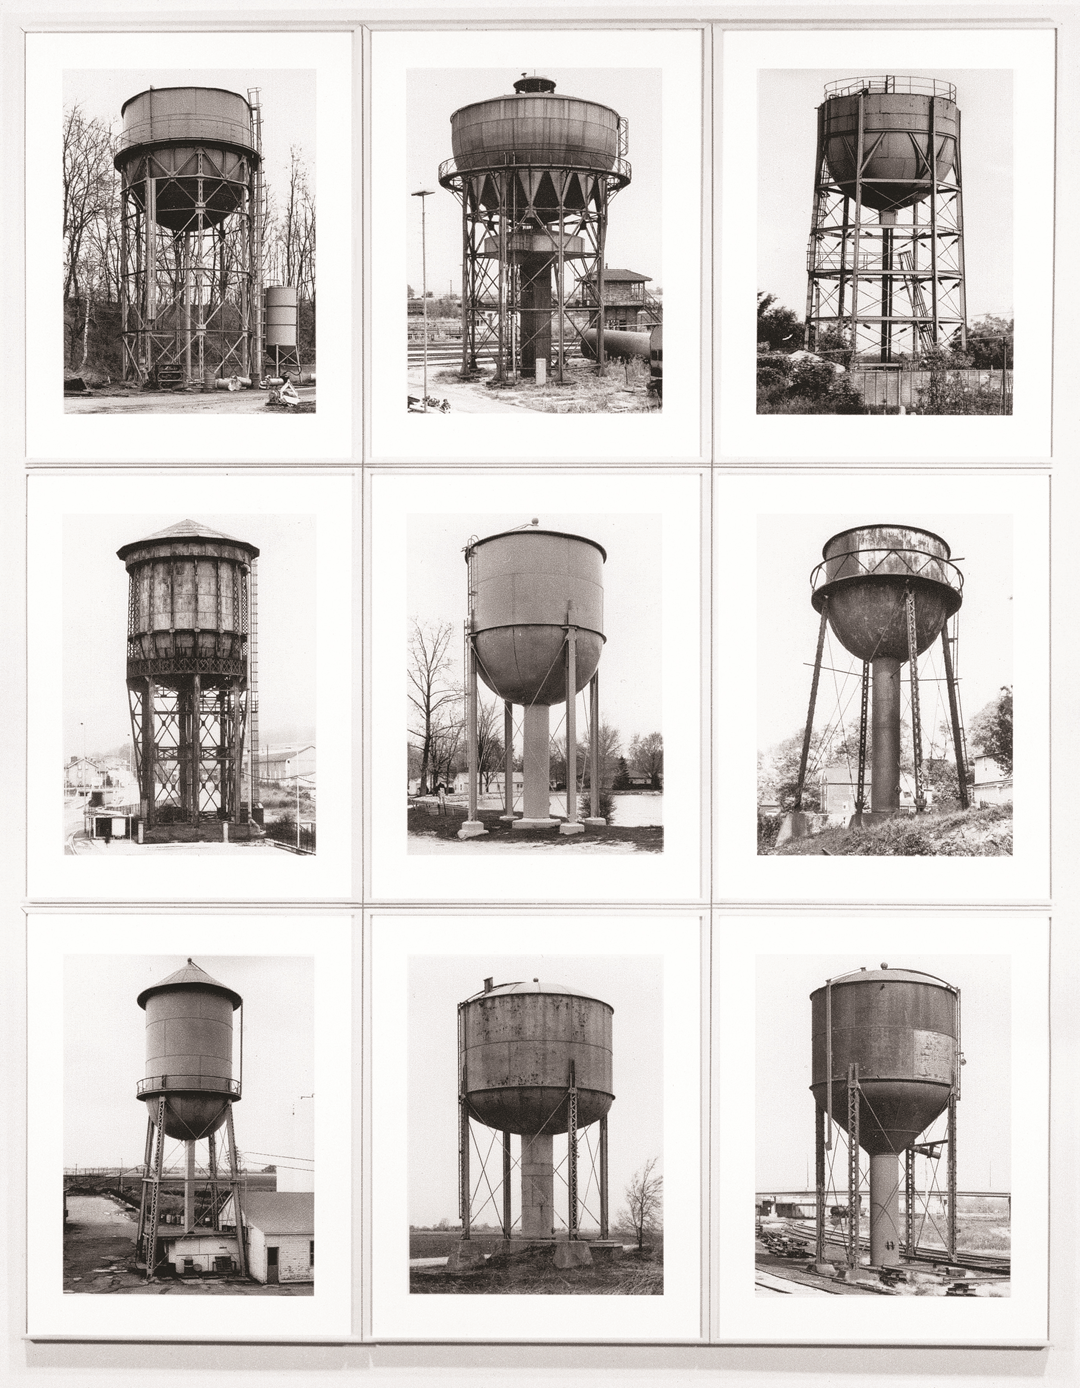 Bernd and Hilla Becher, Water Towers, 1980, as reproduced in Art as Therapy